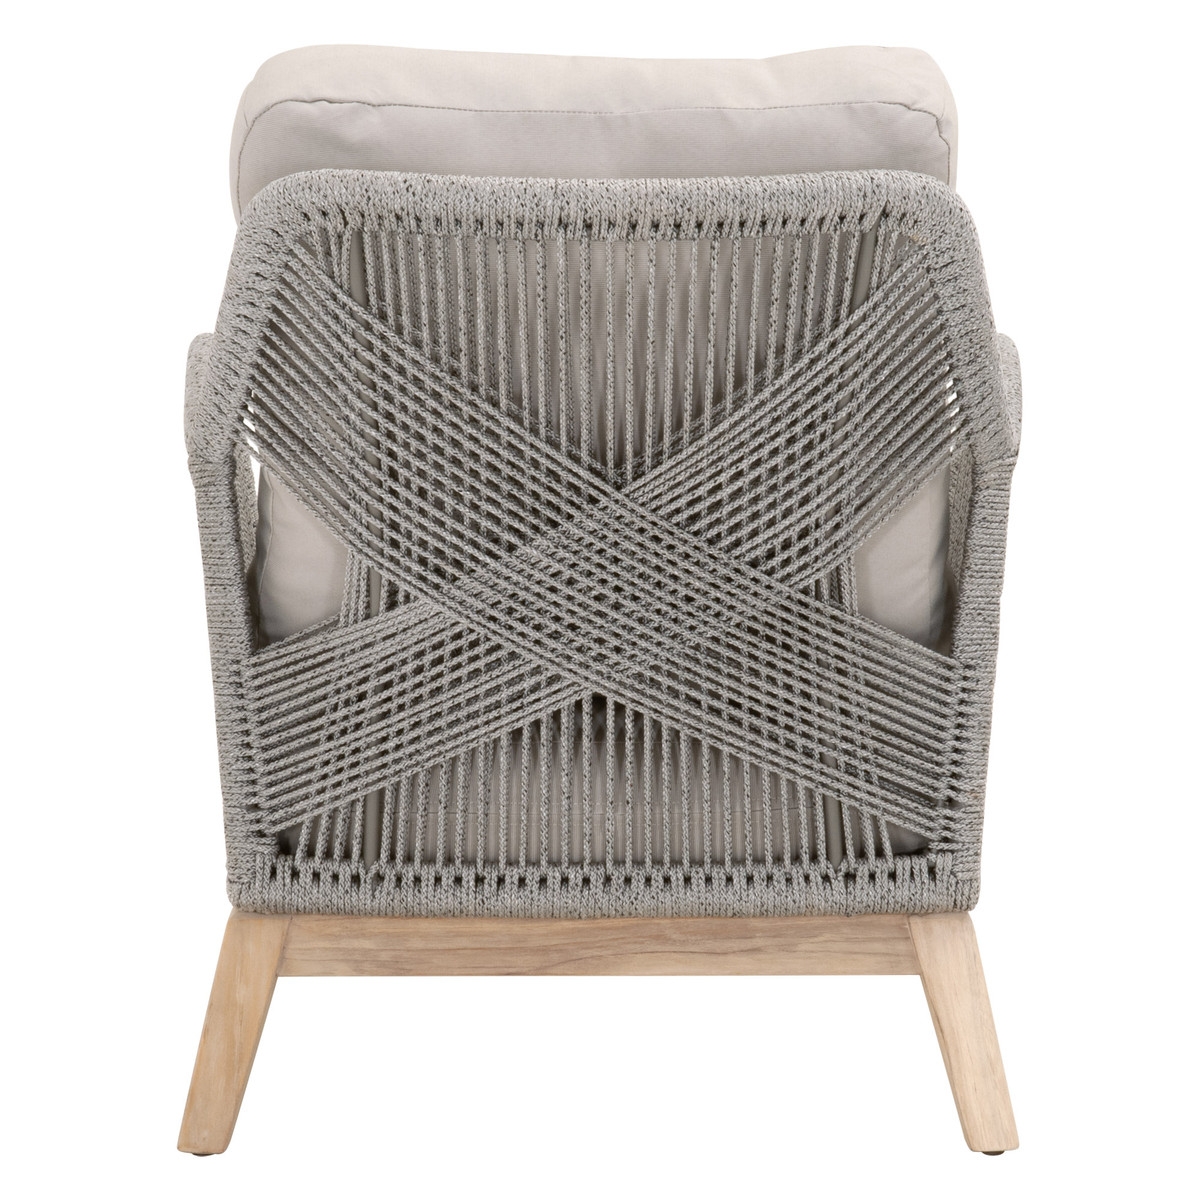 Loom Outdoor Club Chair - Image 6